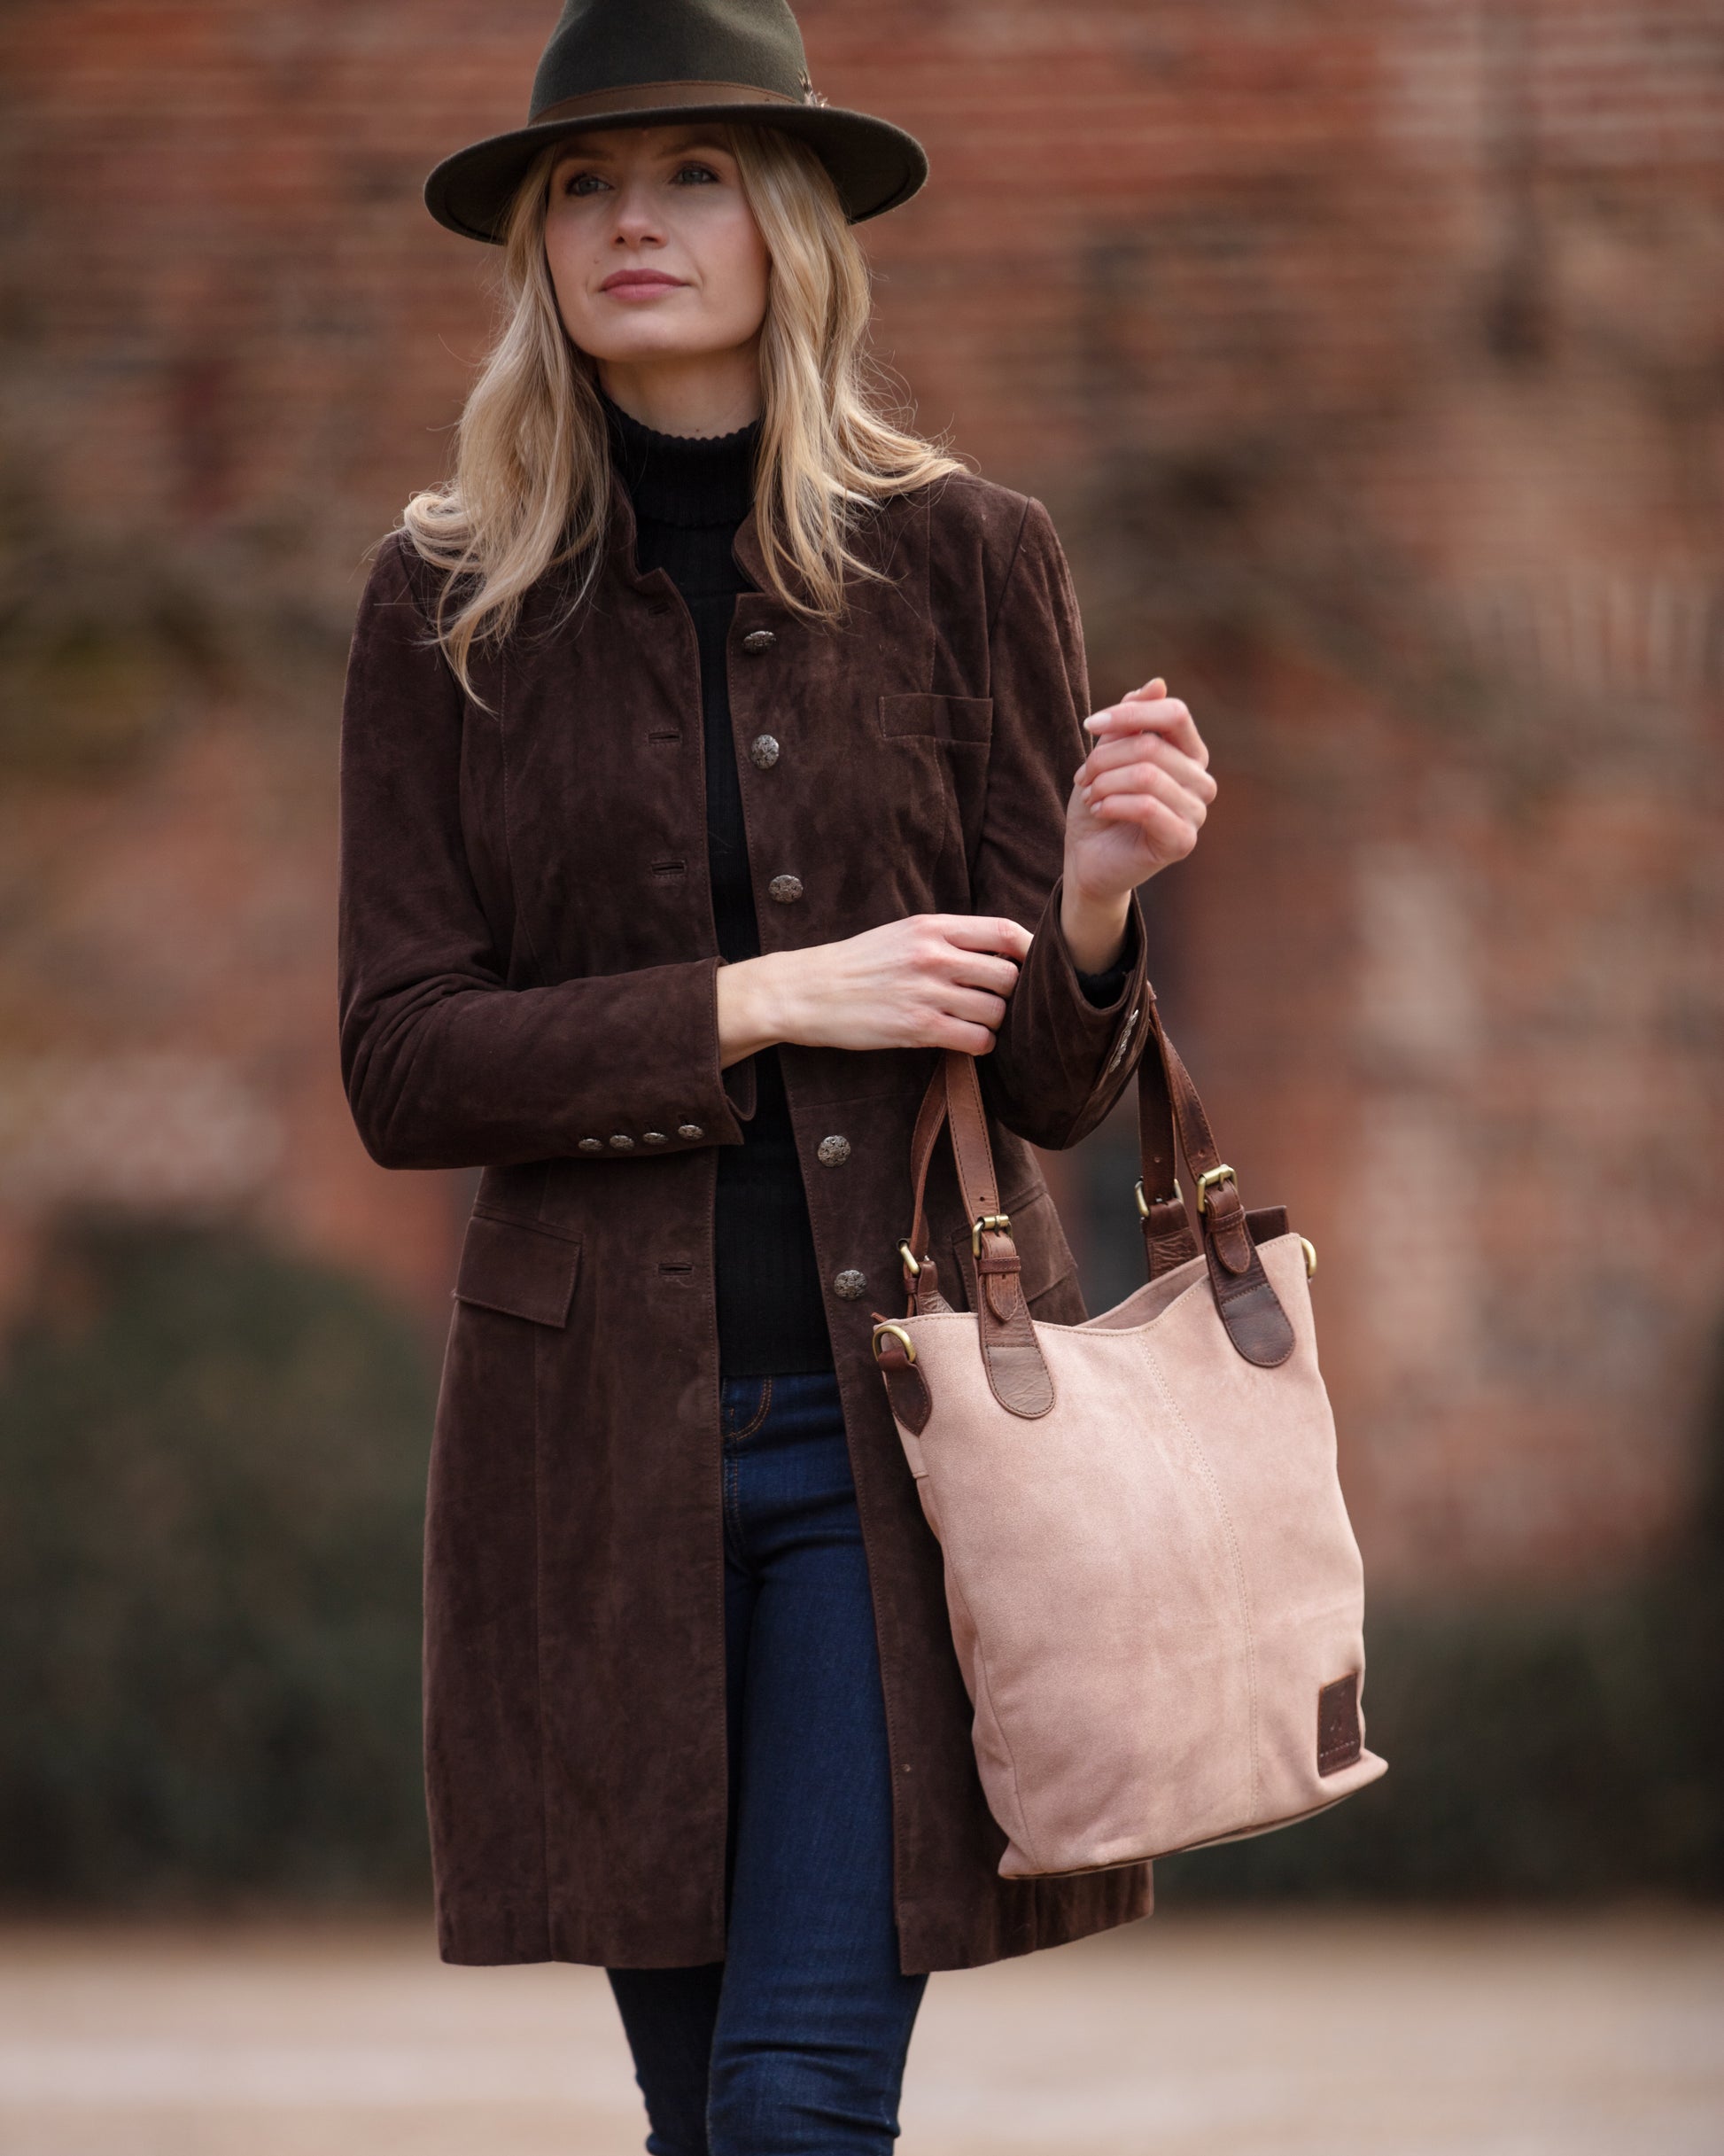 Dusky pink suede and dark brown leather handbag in classic English country style with adjustable shoulder straps and handles. Handmade from full grain vegetable tanned cow leather.